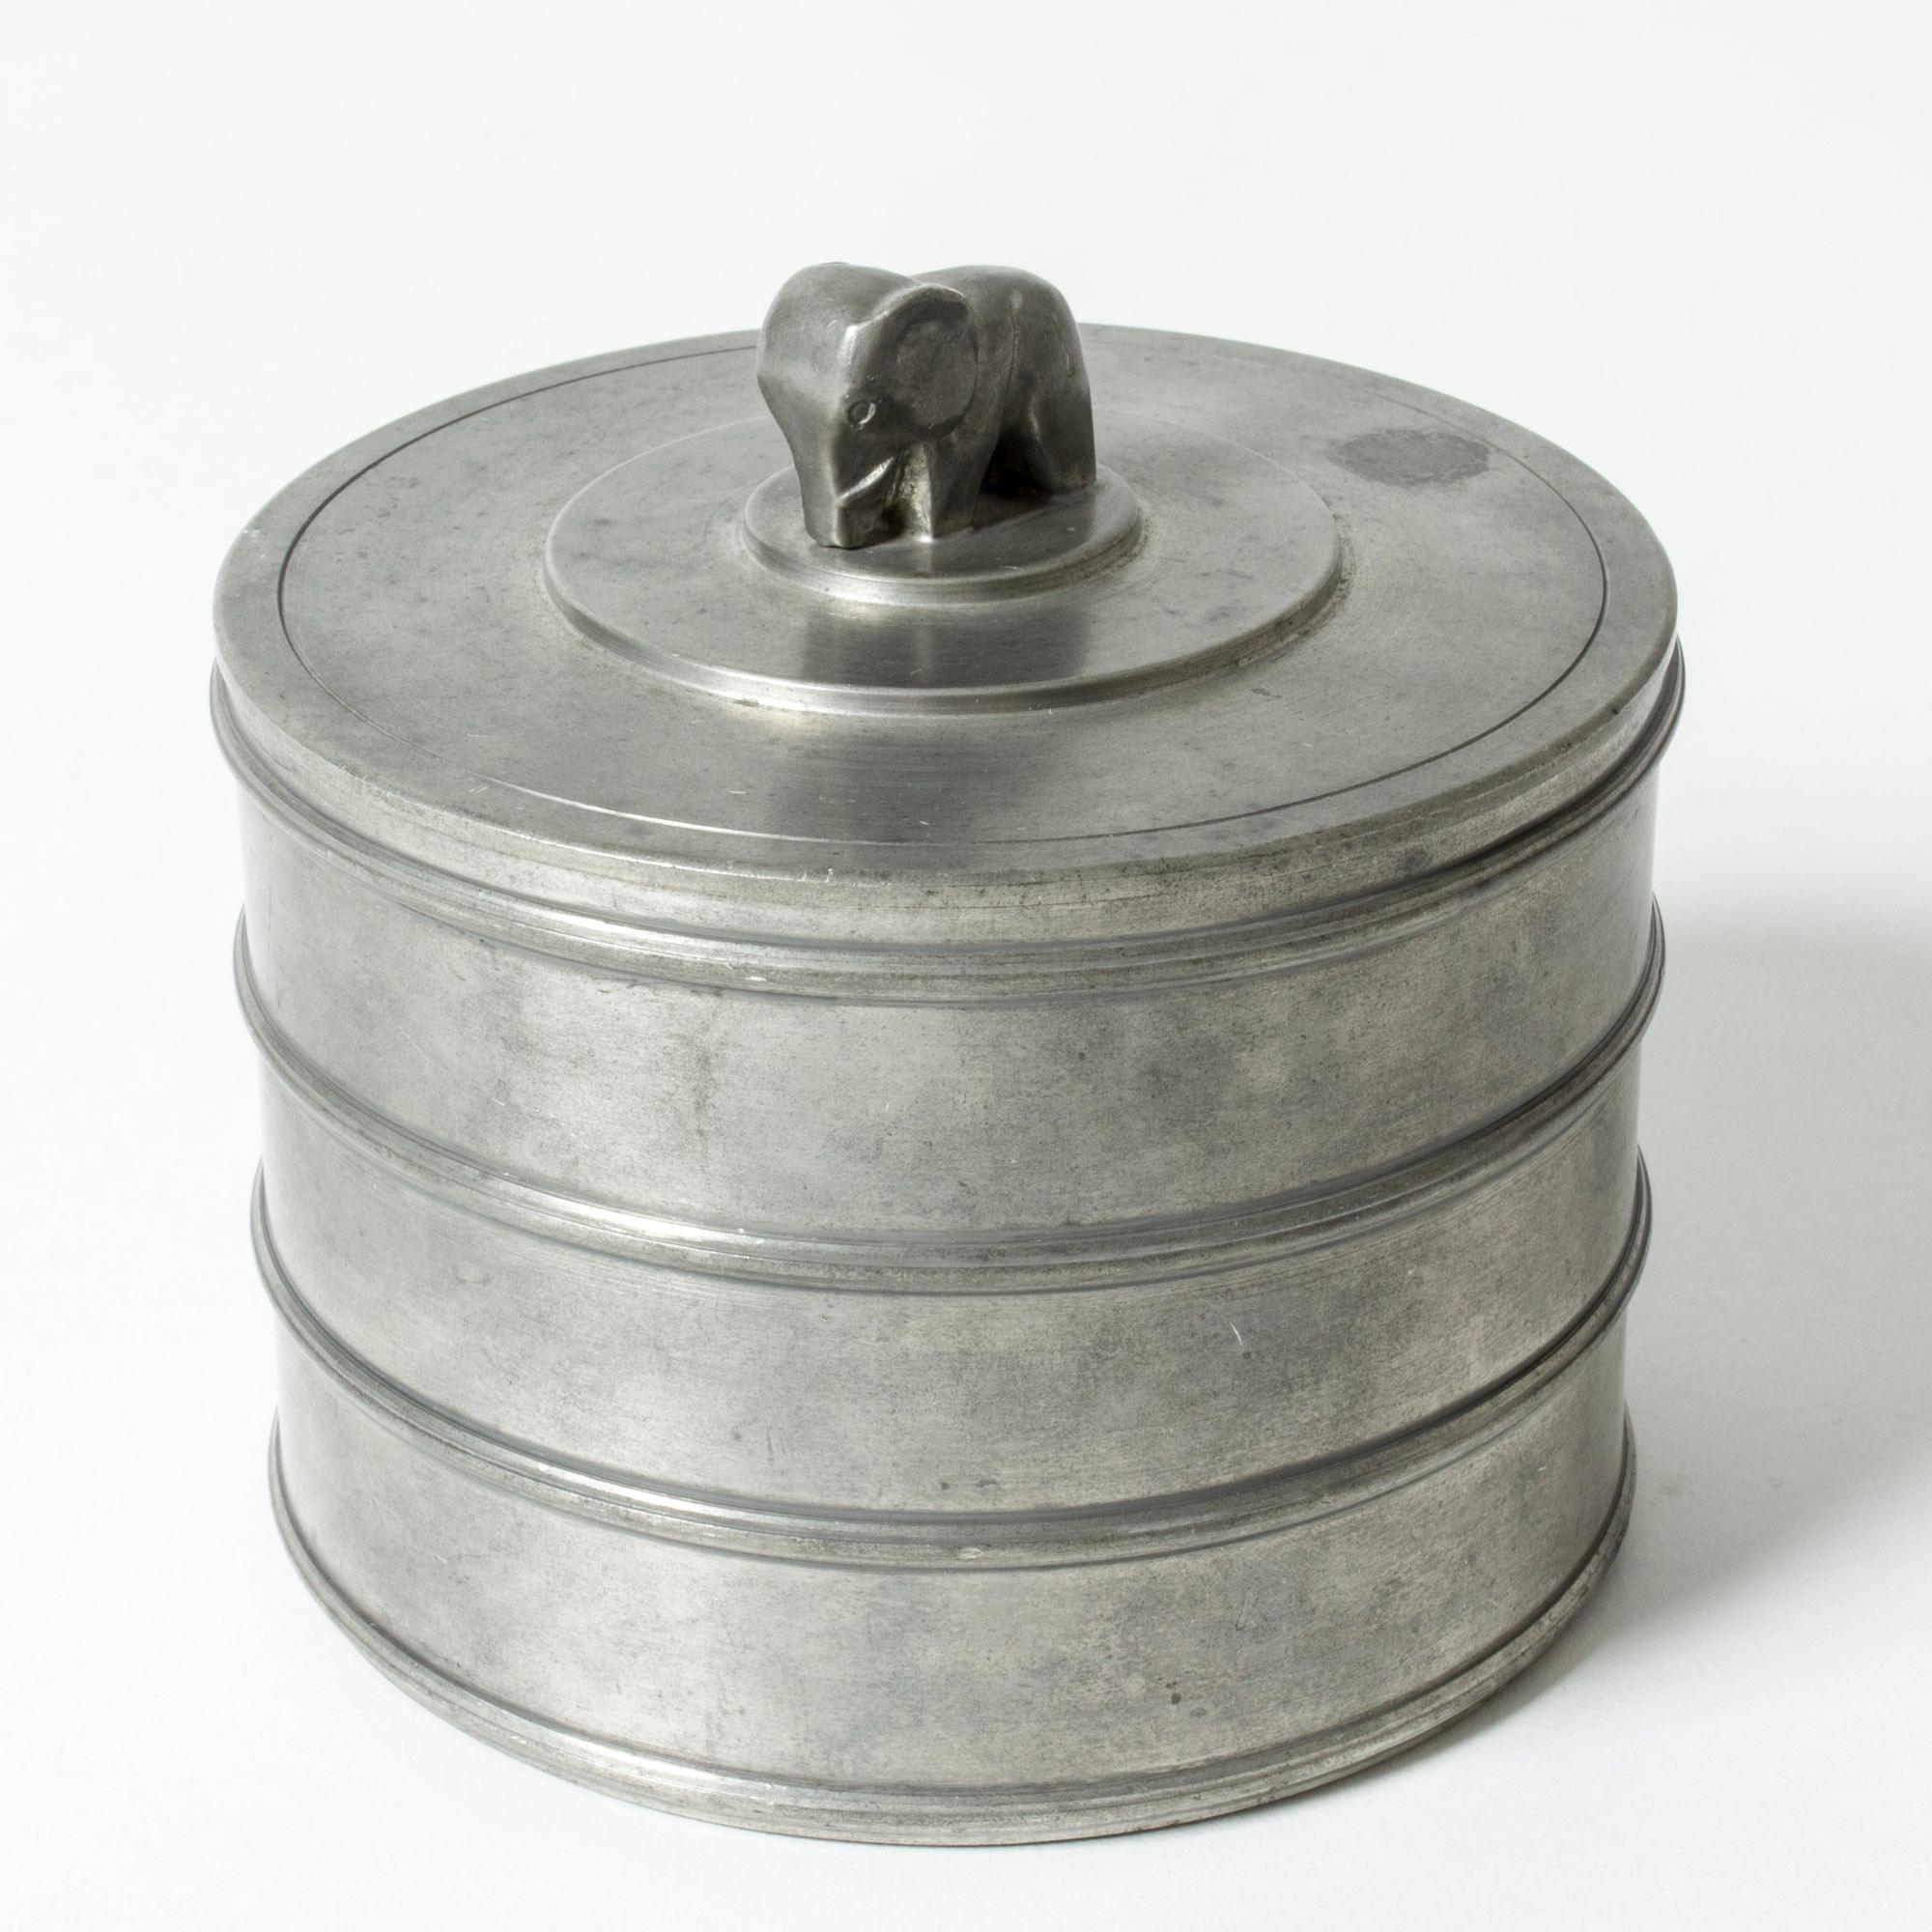 Pewter jar by Sylvia Stave, in a strict simplistic design, contrasted with an adorable elephant on the lid.

Sylvia Stave was a fascinating representative of Swedish mid-century design with her immaculate, sober designs that lead her to become